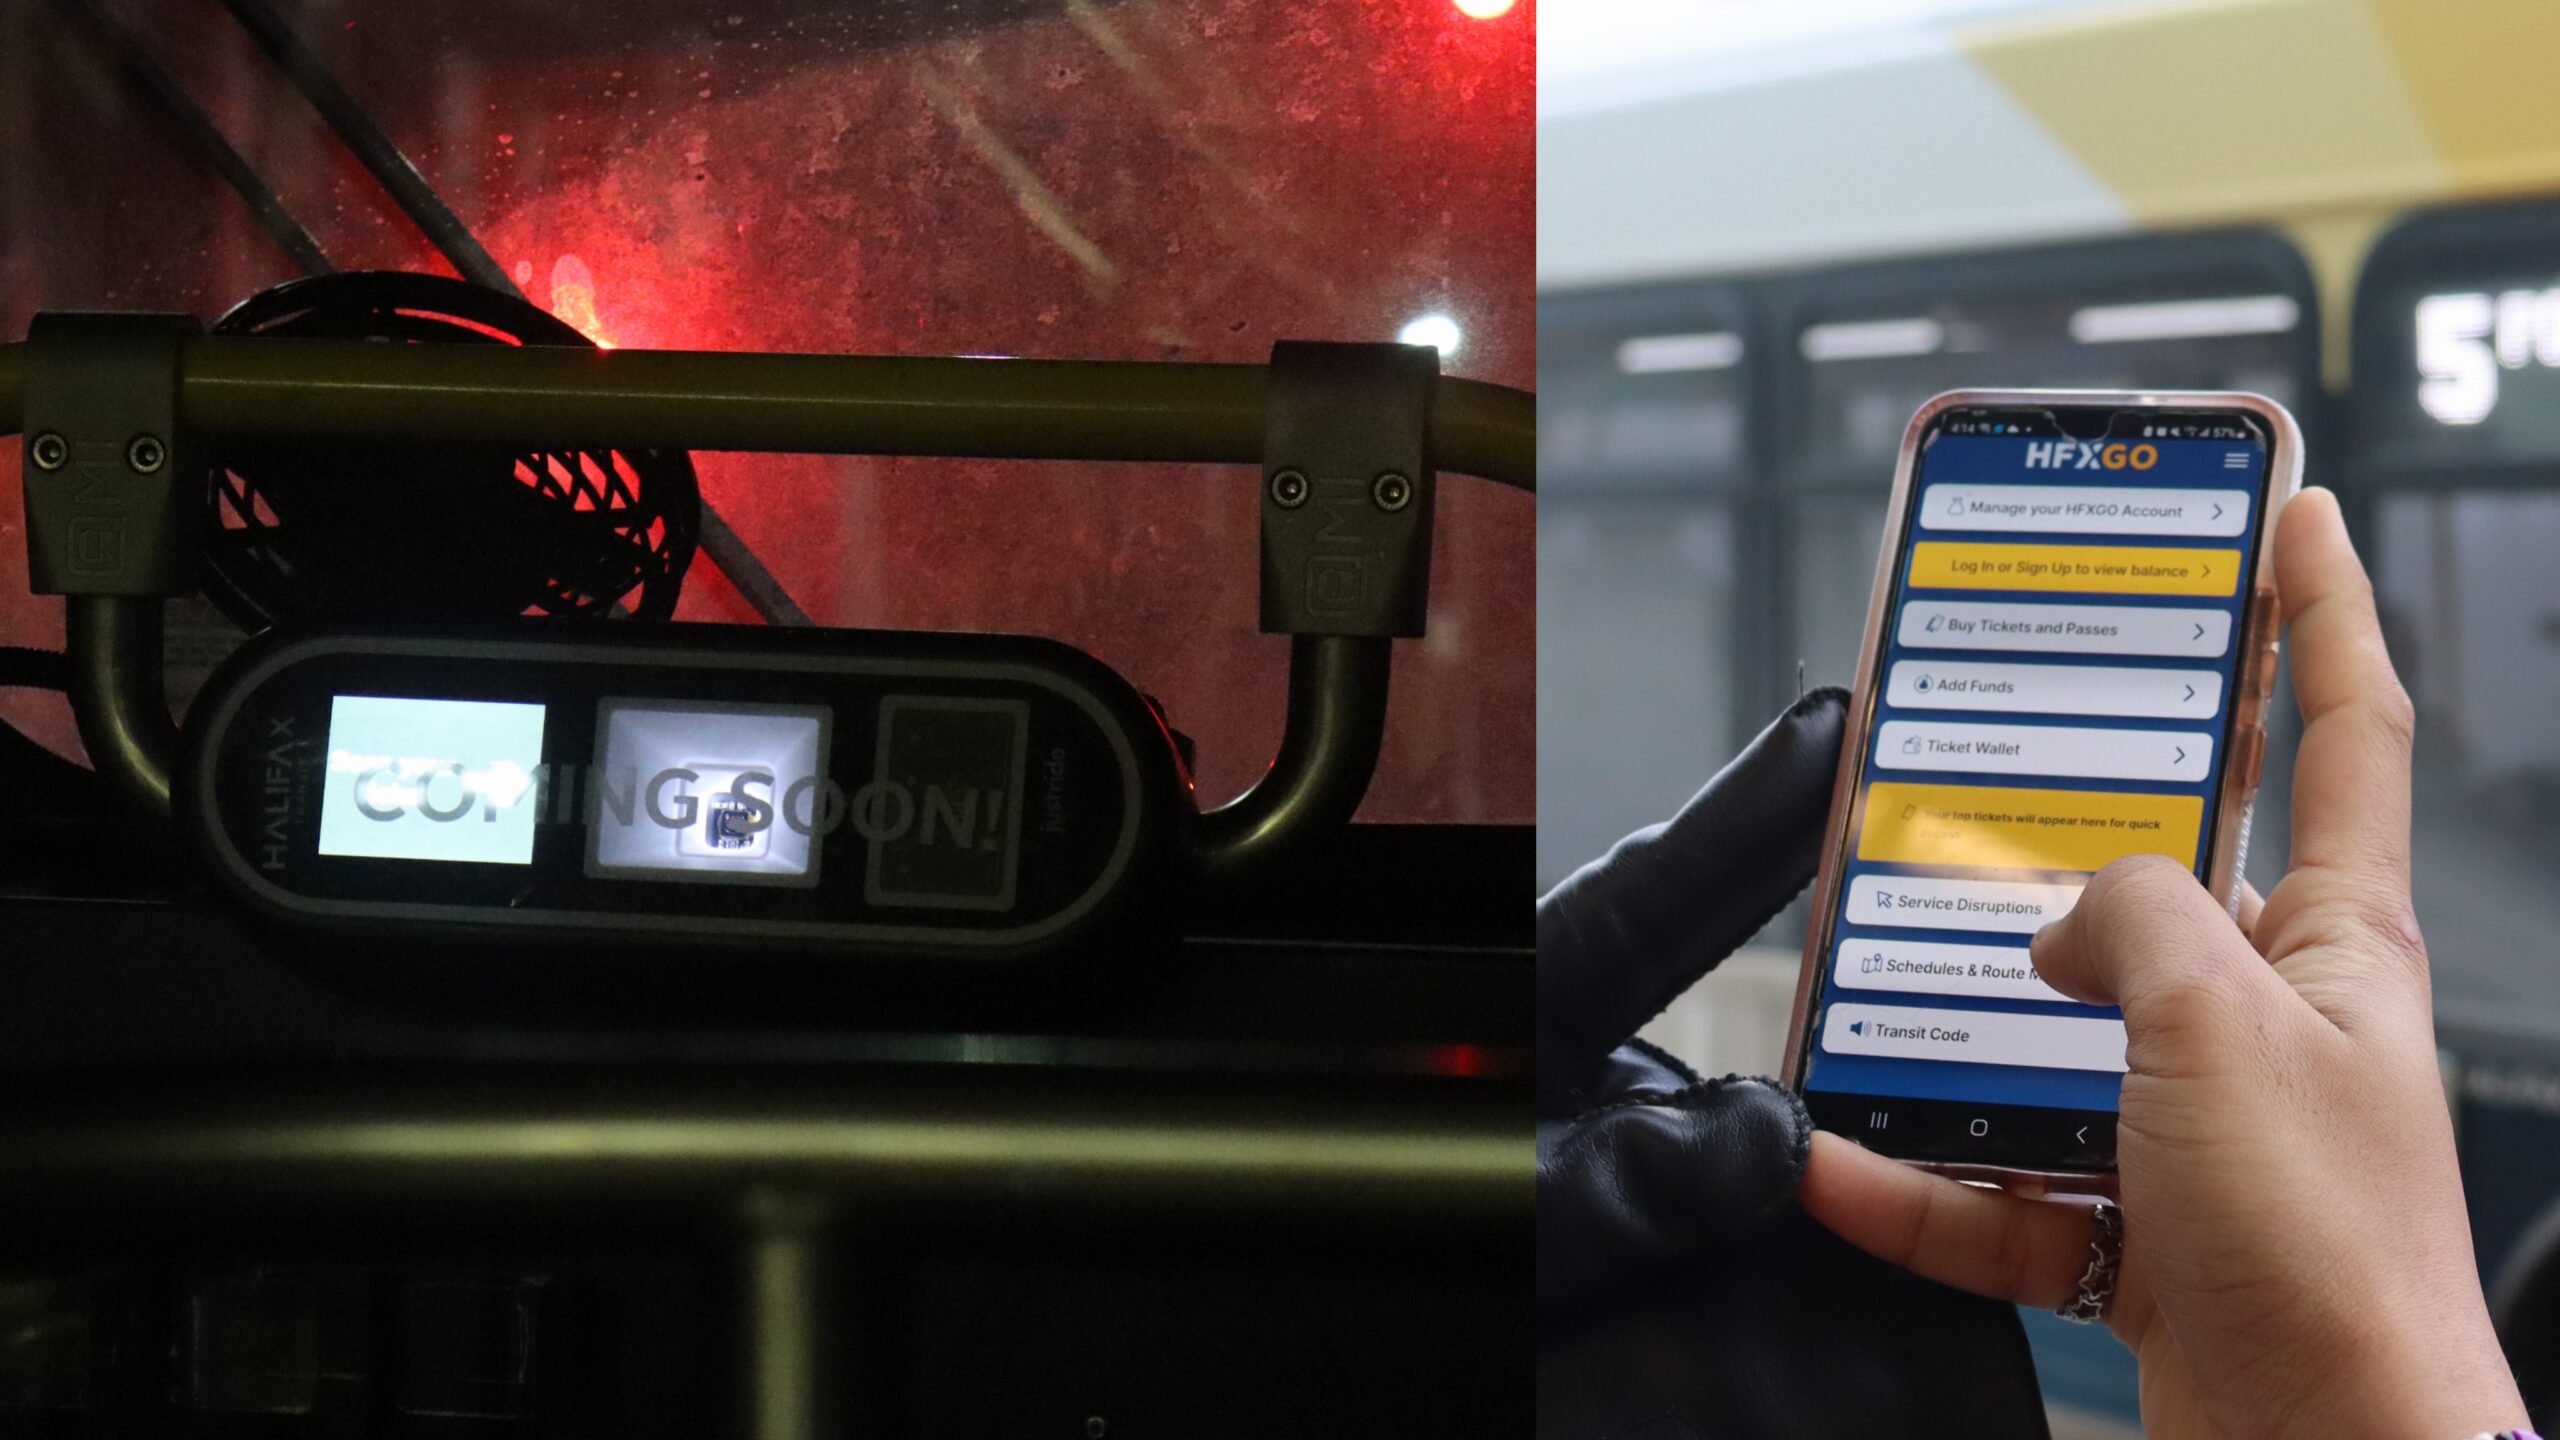 The left is a bus validator with the word "coming soon" on it. The right is a person holding a mobile phone. On the screen is the homepage of the HFXGO app, with the No. 5 bus behind it.